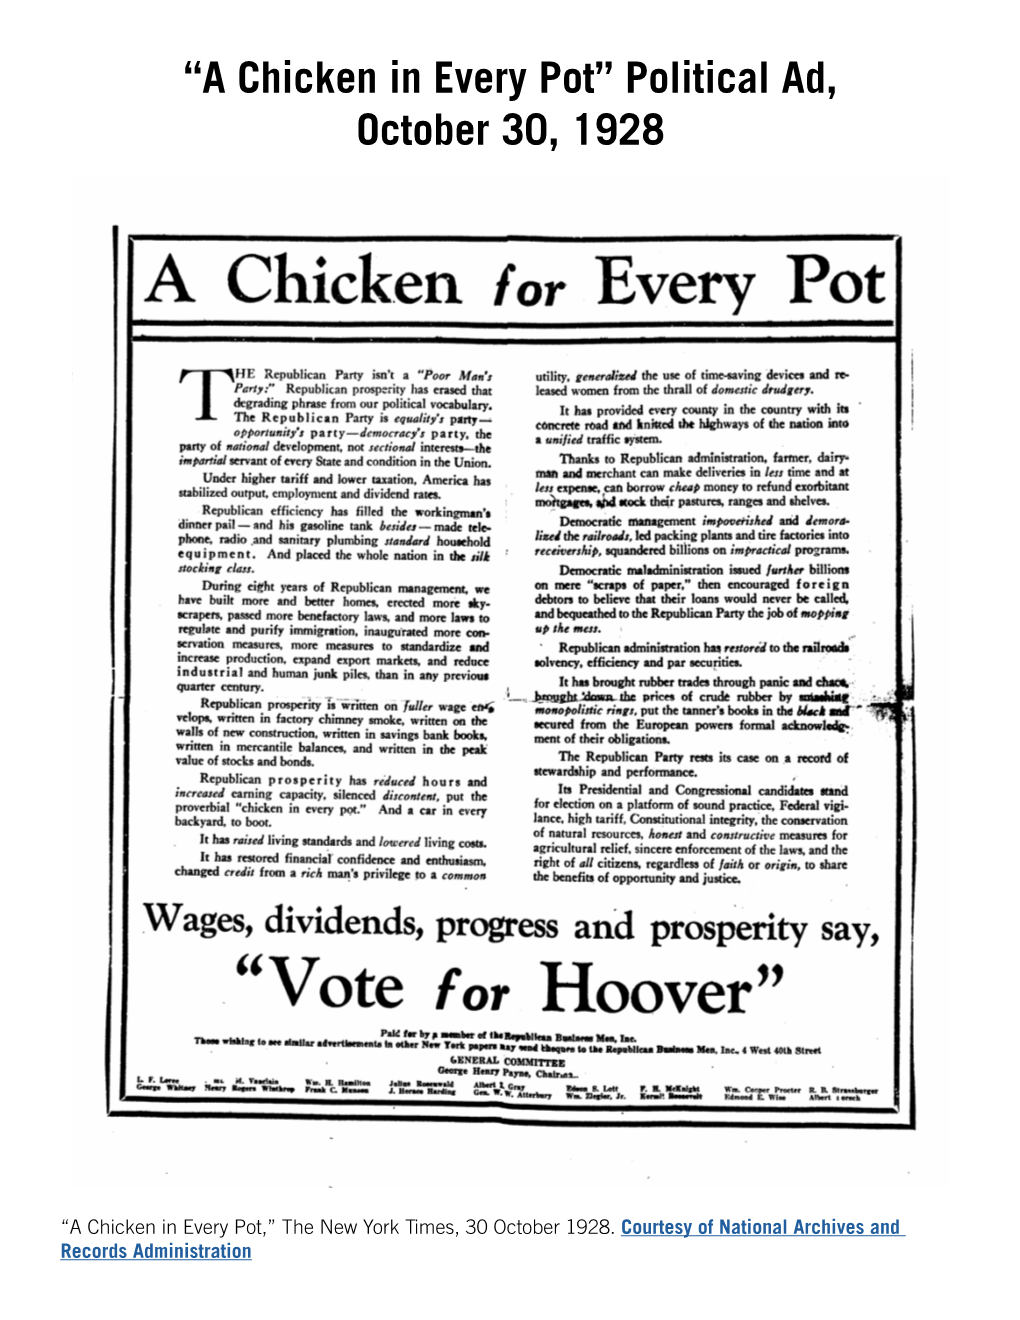 “A Chicken in Every Pot” Political Ad, October 30, 1928